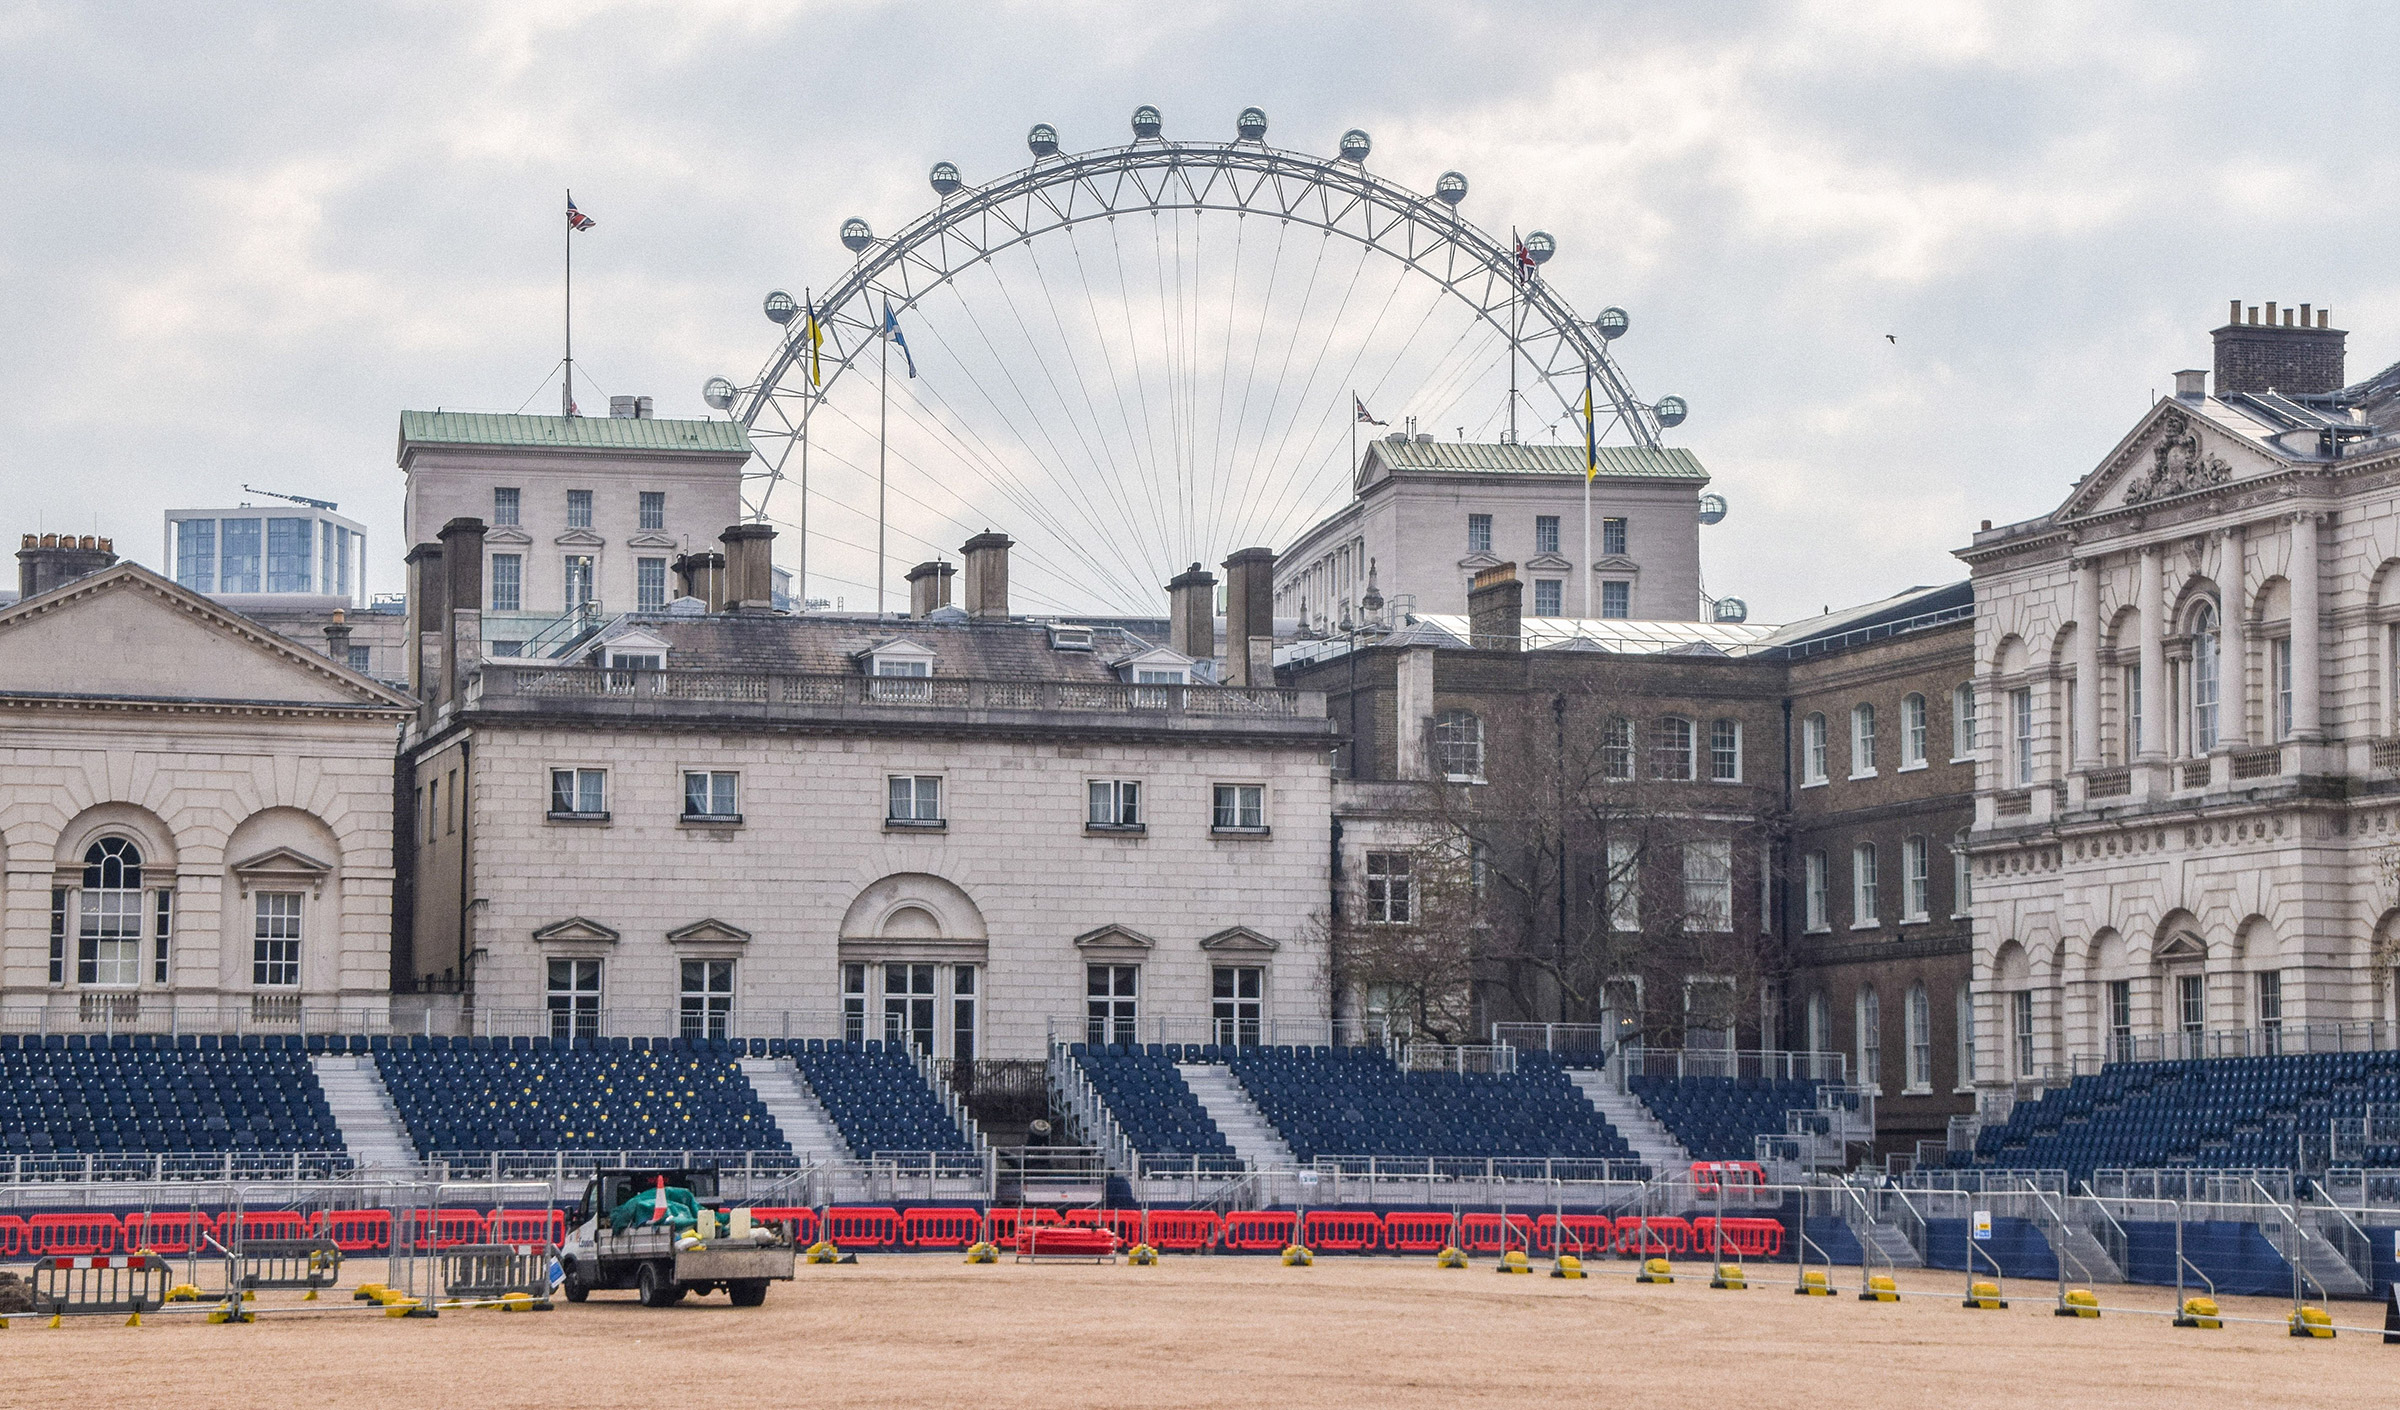 Workers set up seats at Horse Guards Parade on April 17.  (Vuk Vlasic-SOPA Images/Shutterstock)